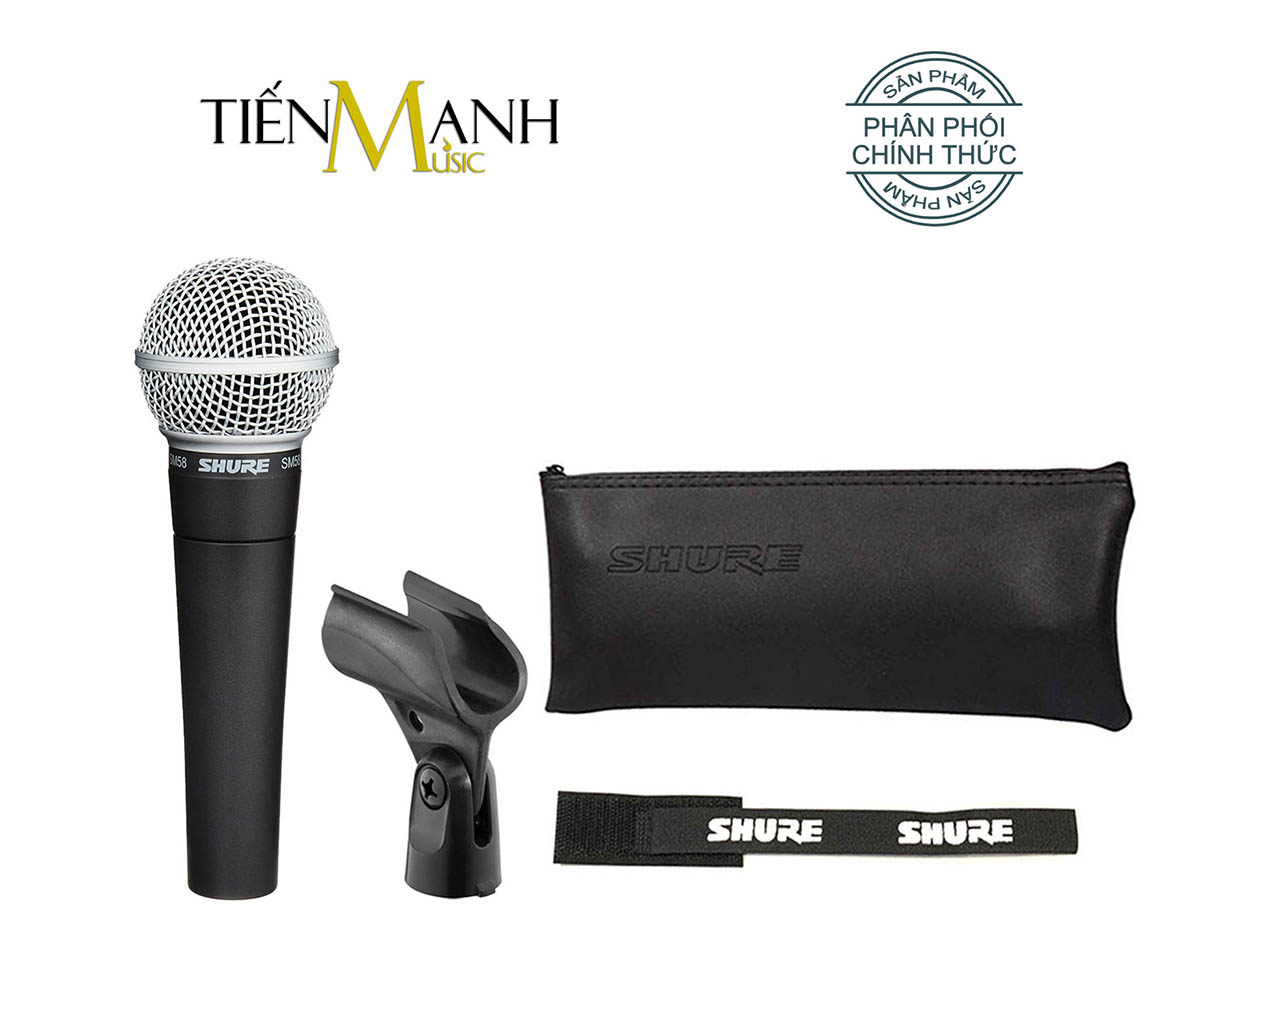 microphone-shure-sm58-s